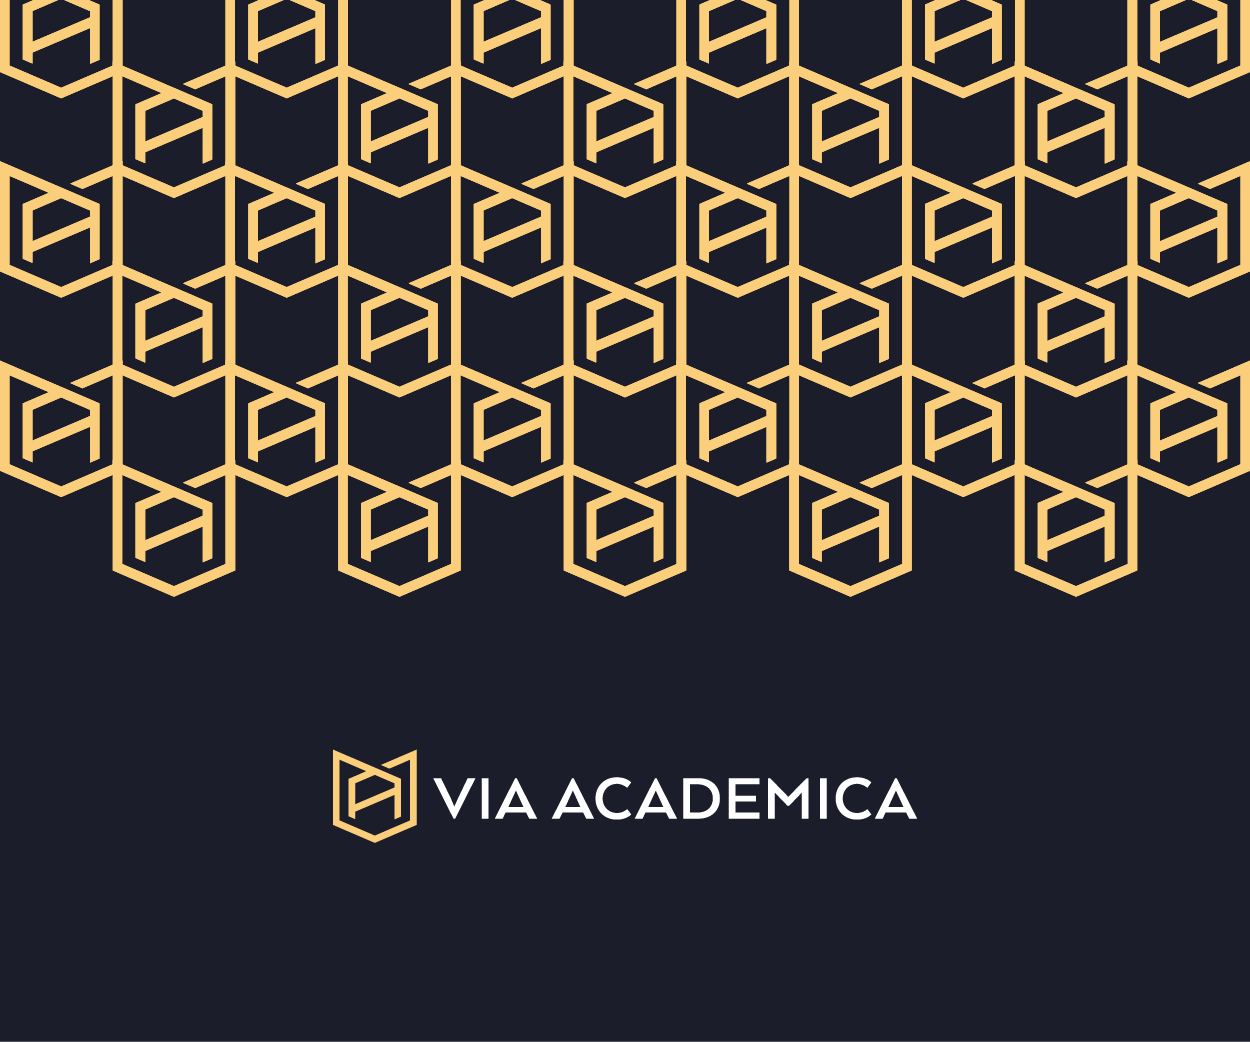 Via Academica - studying abroad and academic career orientation company Logo Design Image